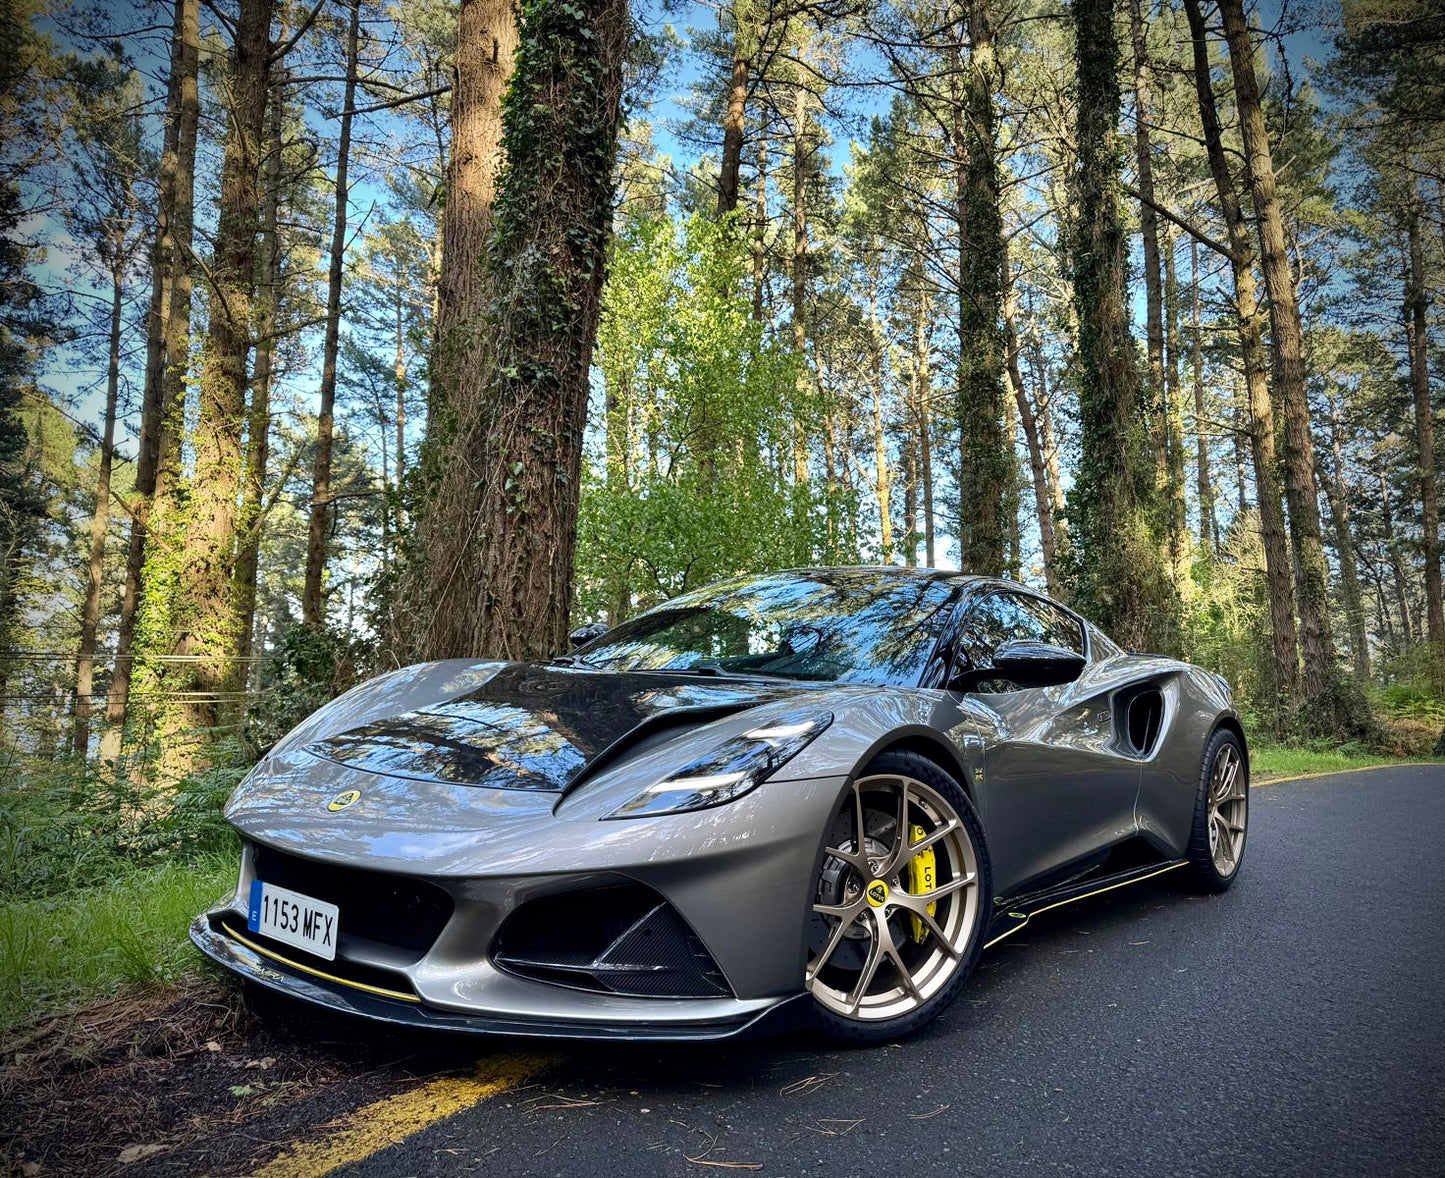 Lotus Ultra-Light Alloy Forged Wheels V2 by Aerie Performance